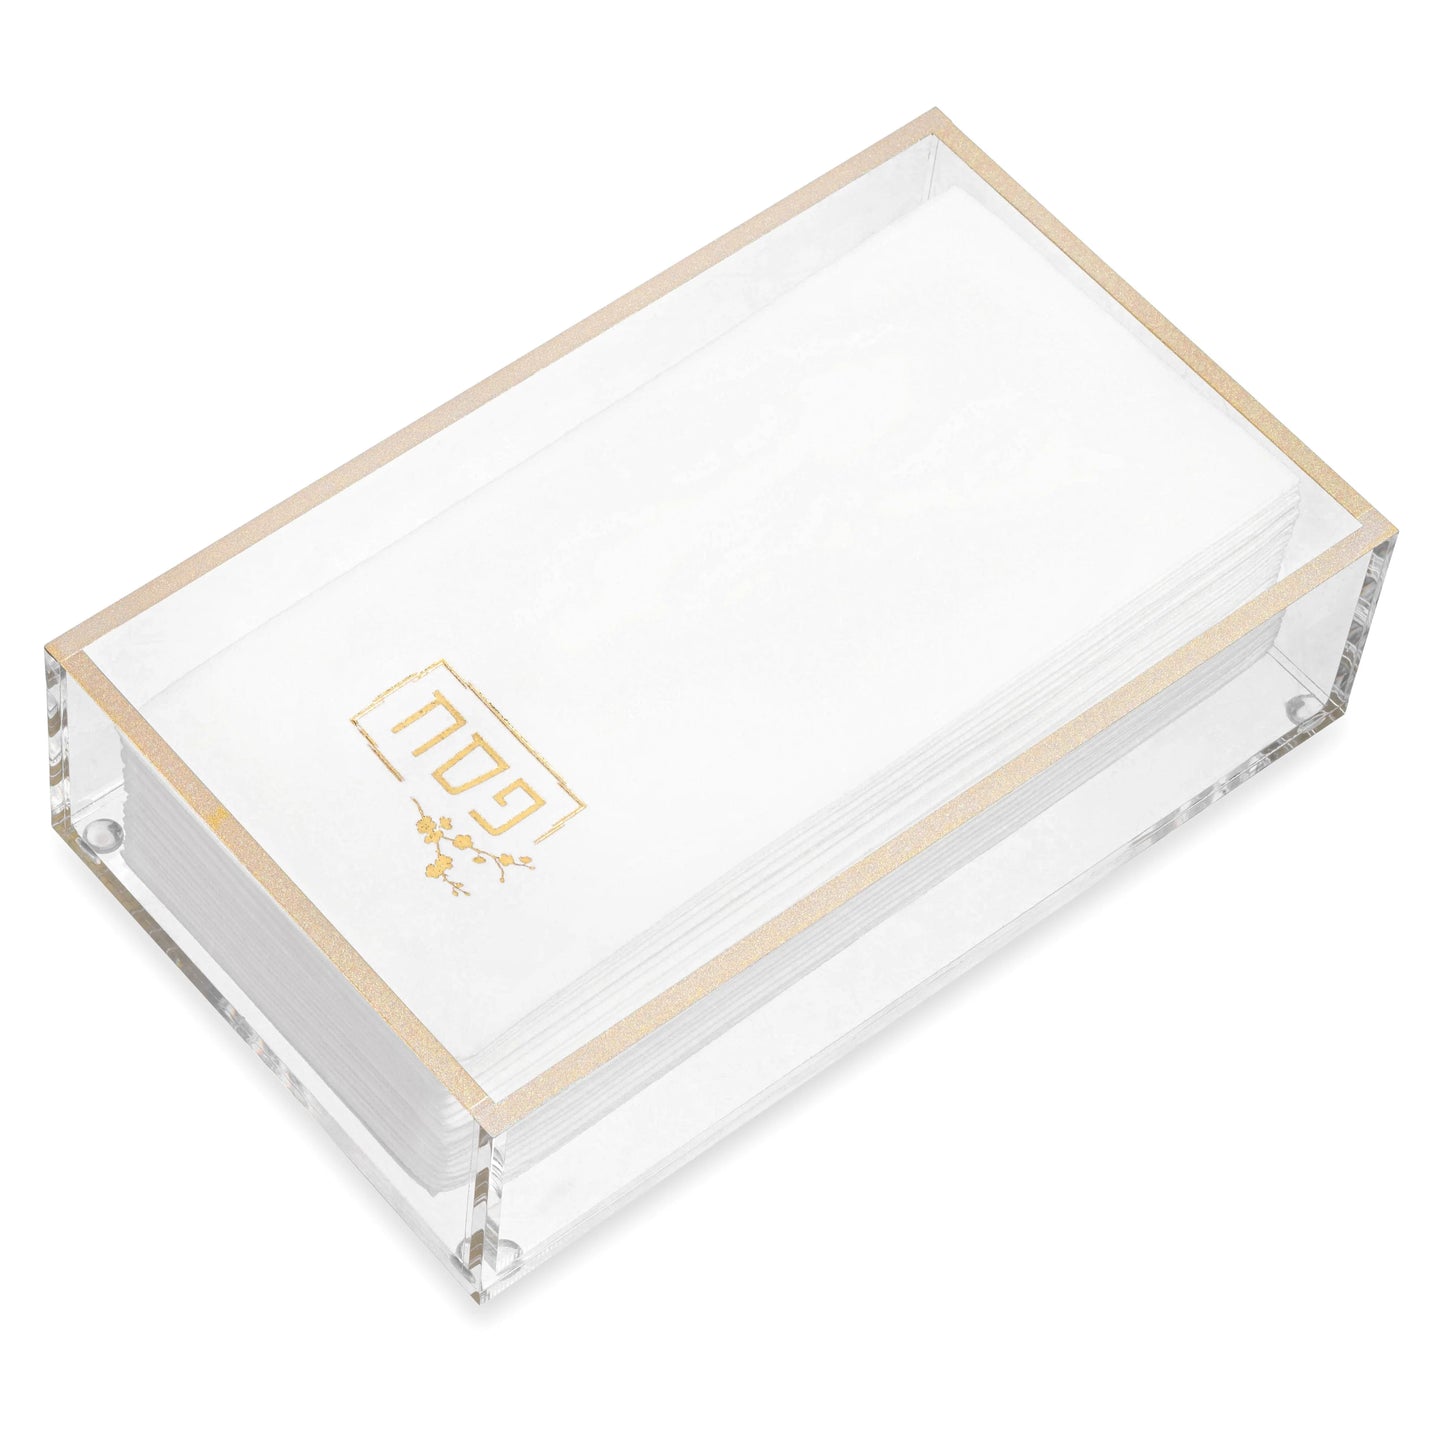 Netilas Yadayim Disposable Guest Towels